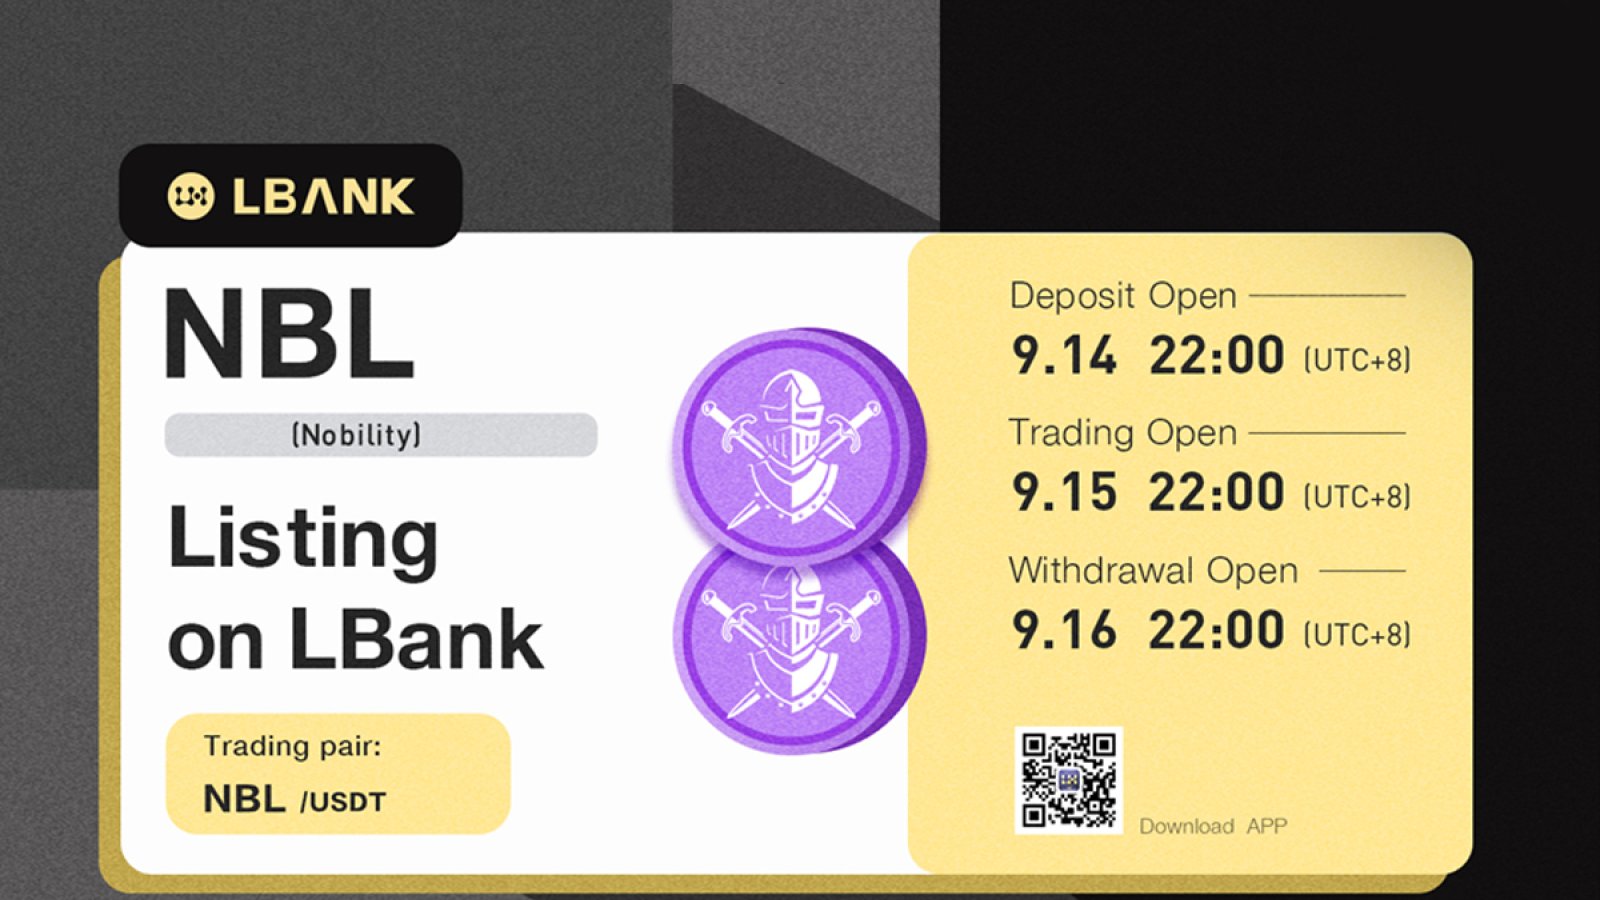 LBank Exchange Will List NBL (Nobility) on September 15, 2021